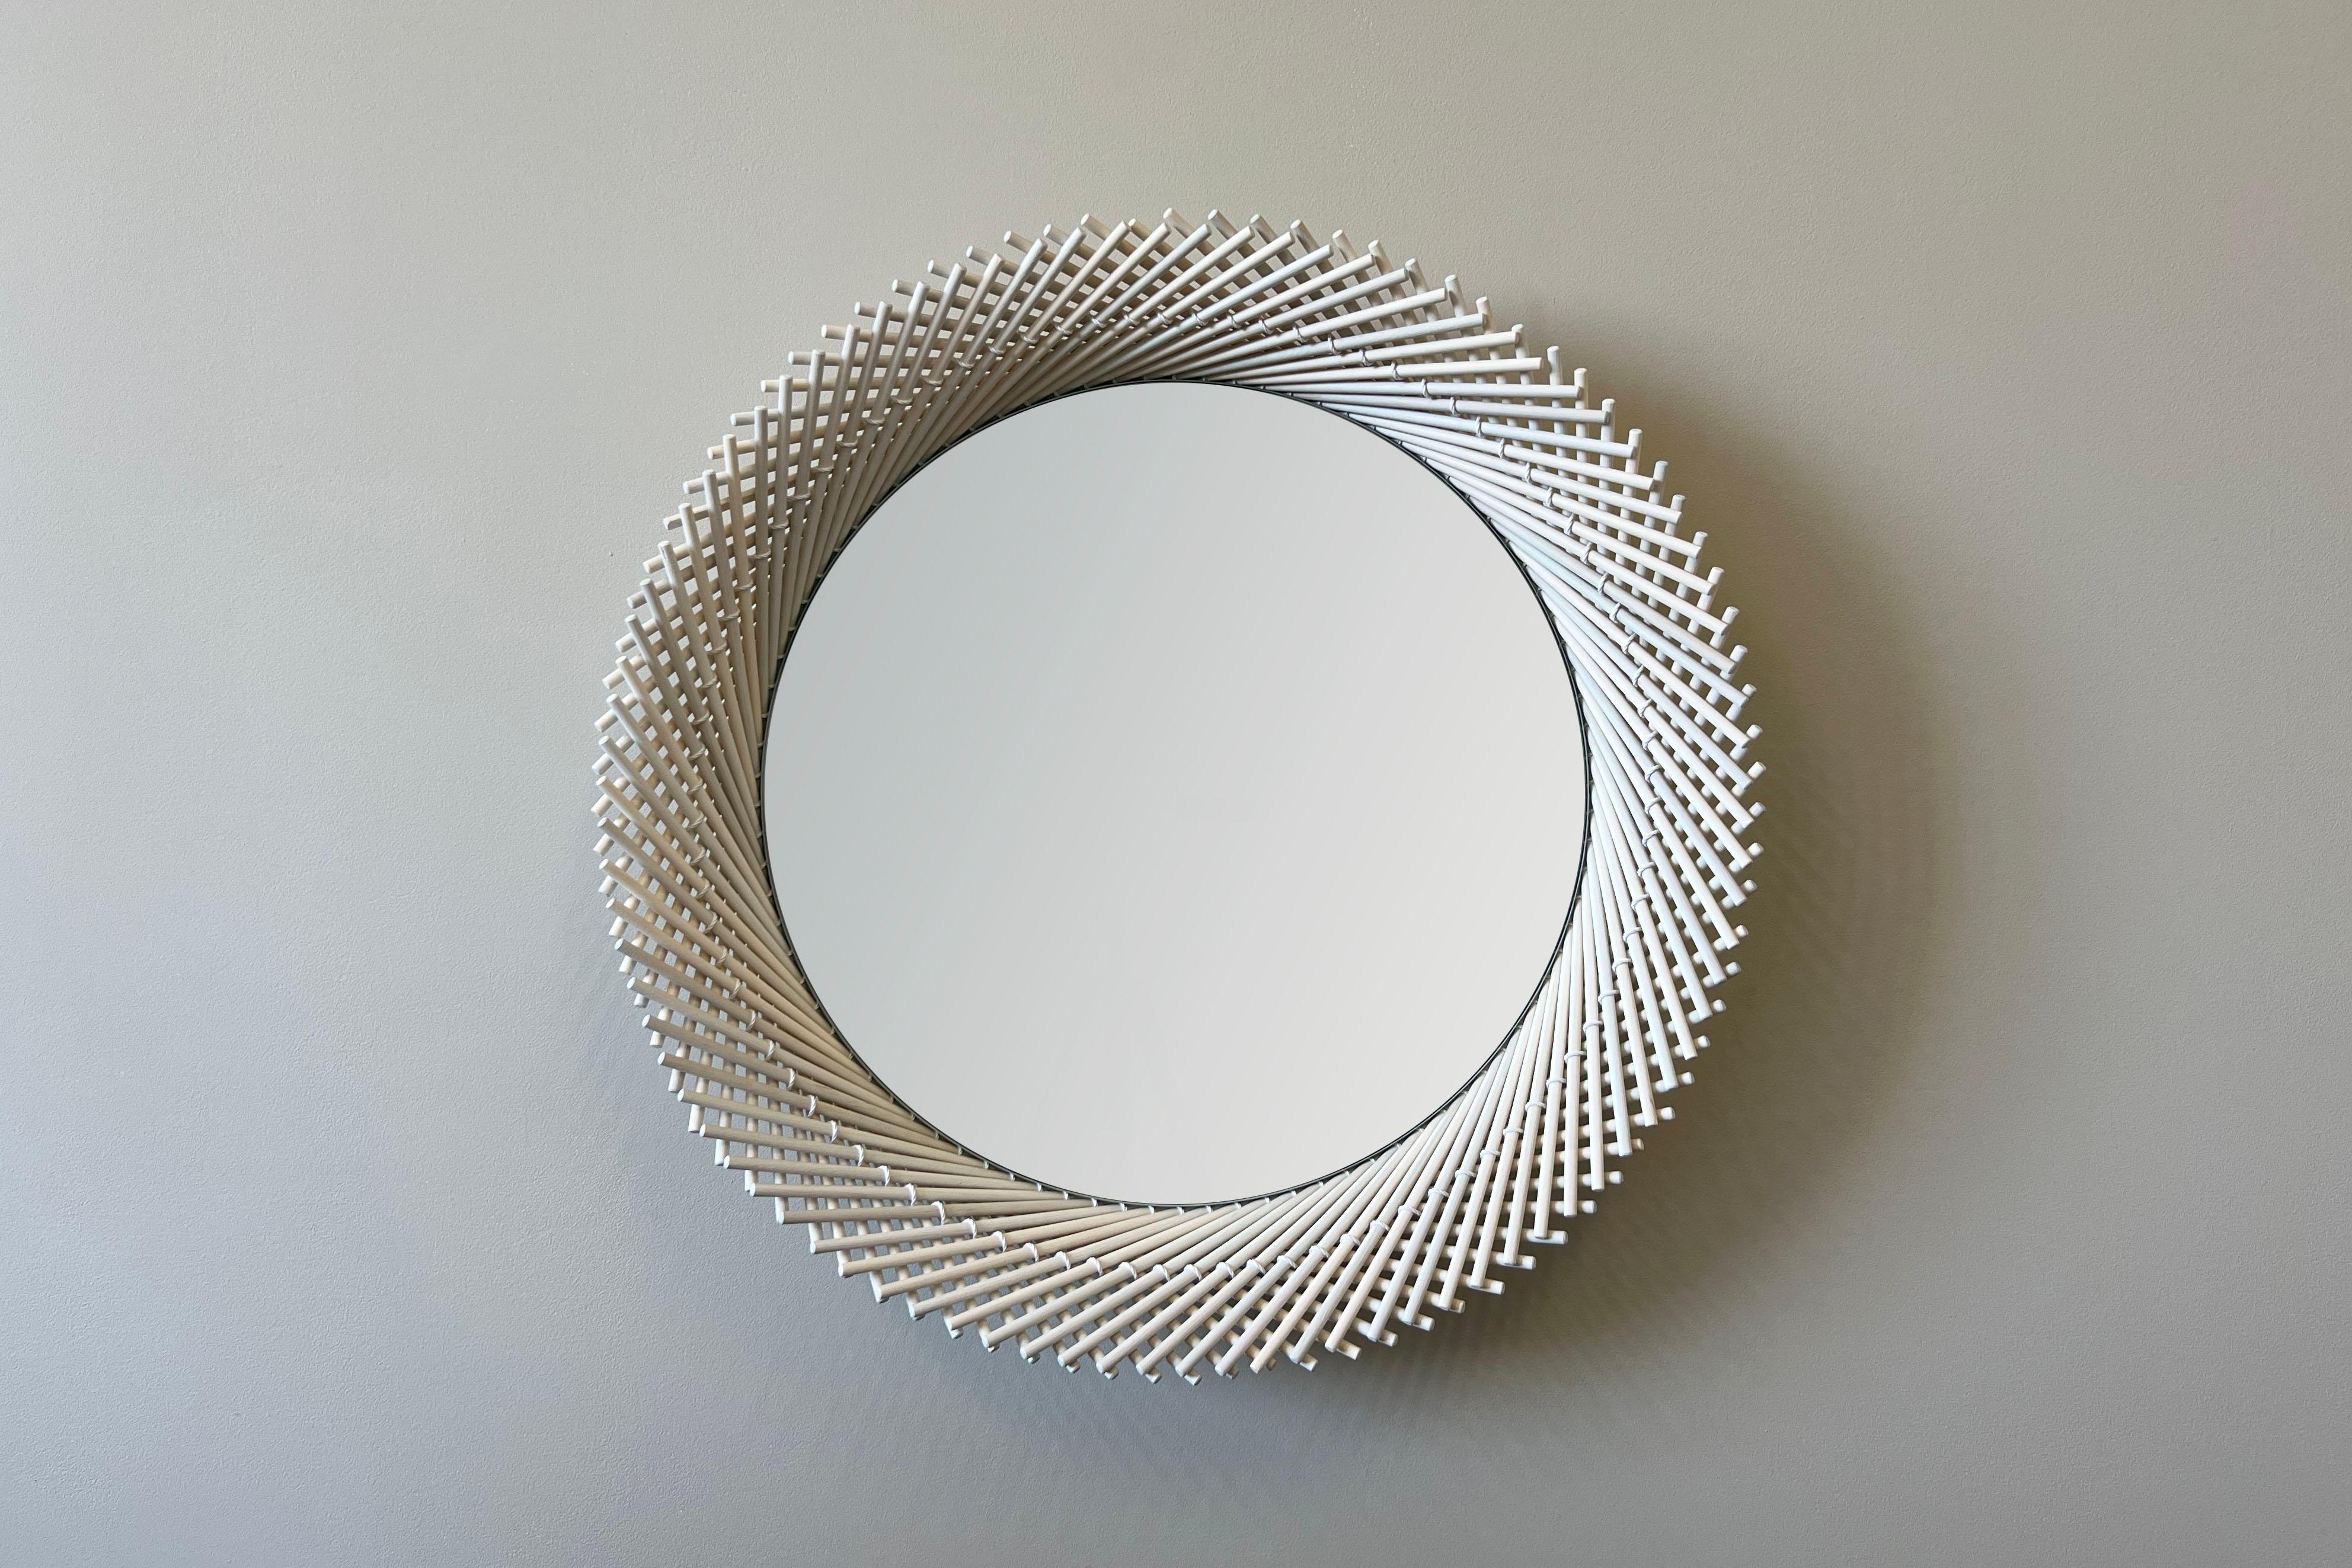 The Mooda mirror is composed of a set of dowels stitched together to create a beautiful geometric edge around the glass. The mirror in turn reflects the dowels along its circumference, completing the traditional form of the Mooda. 

Available in two